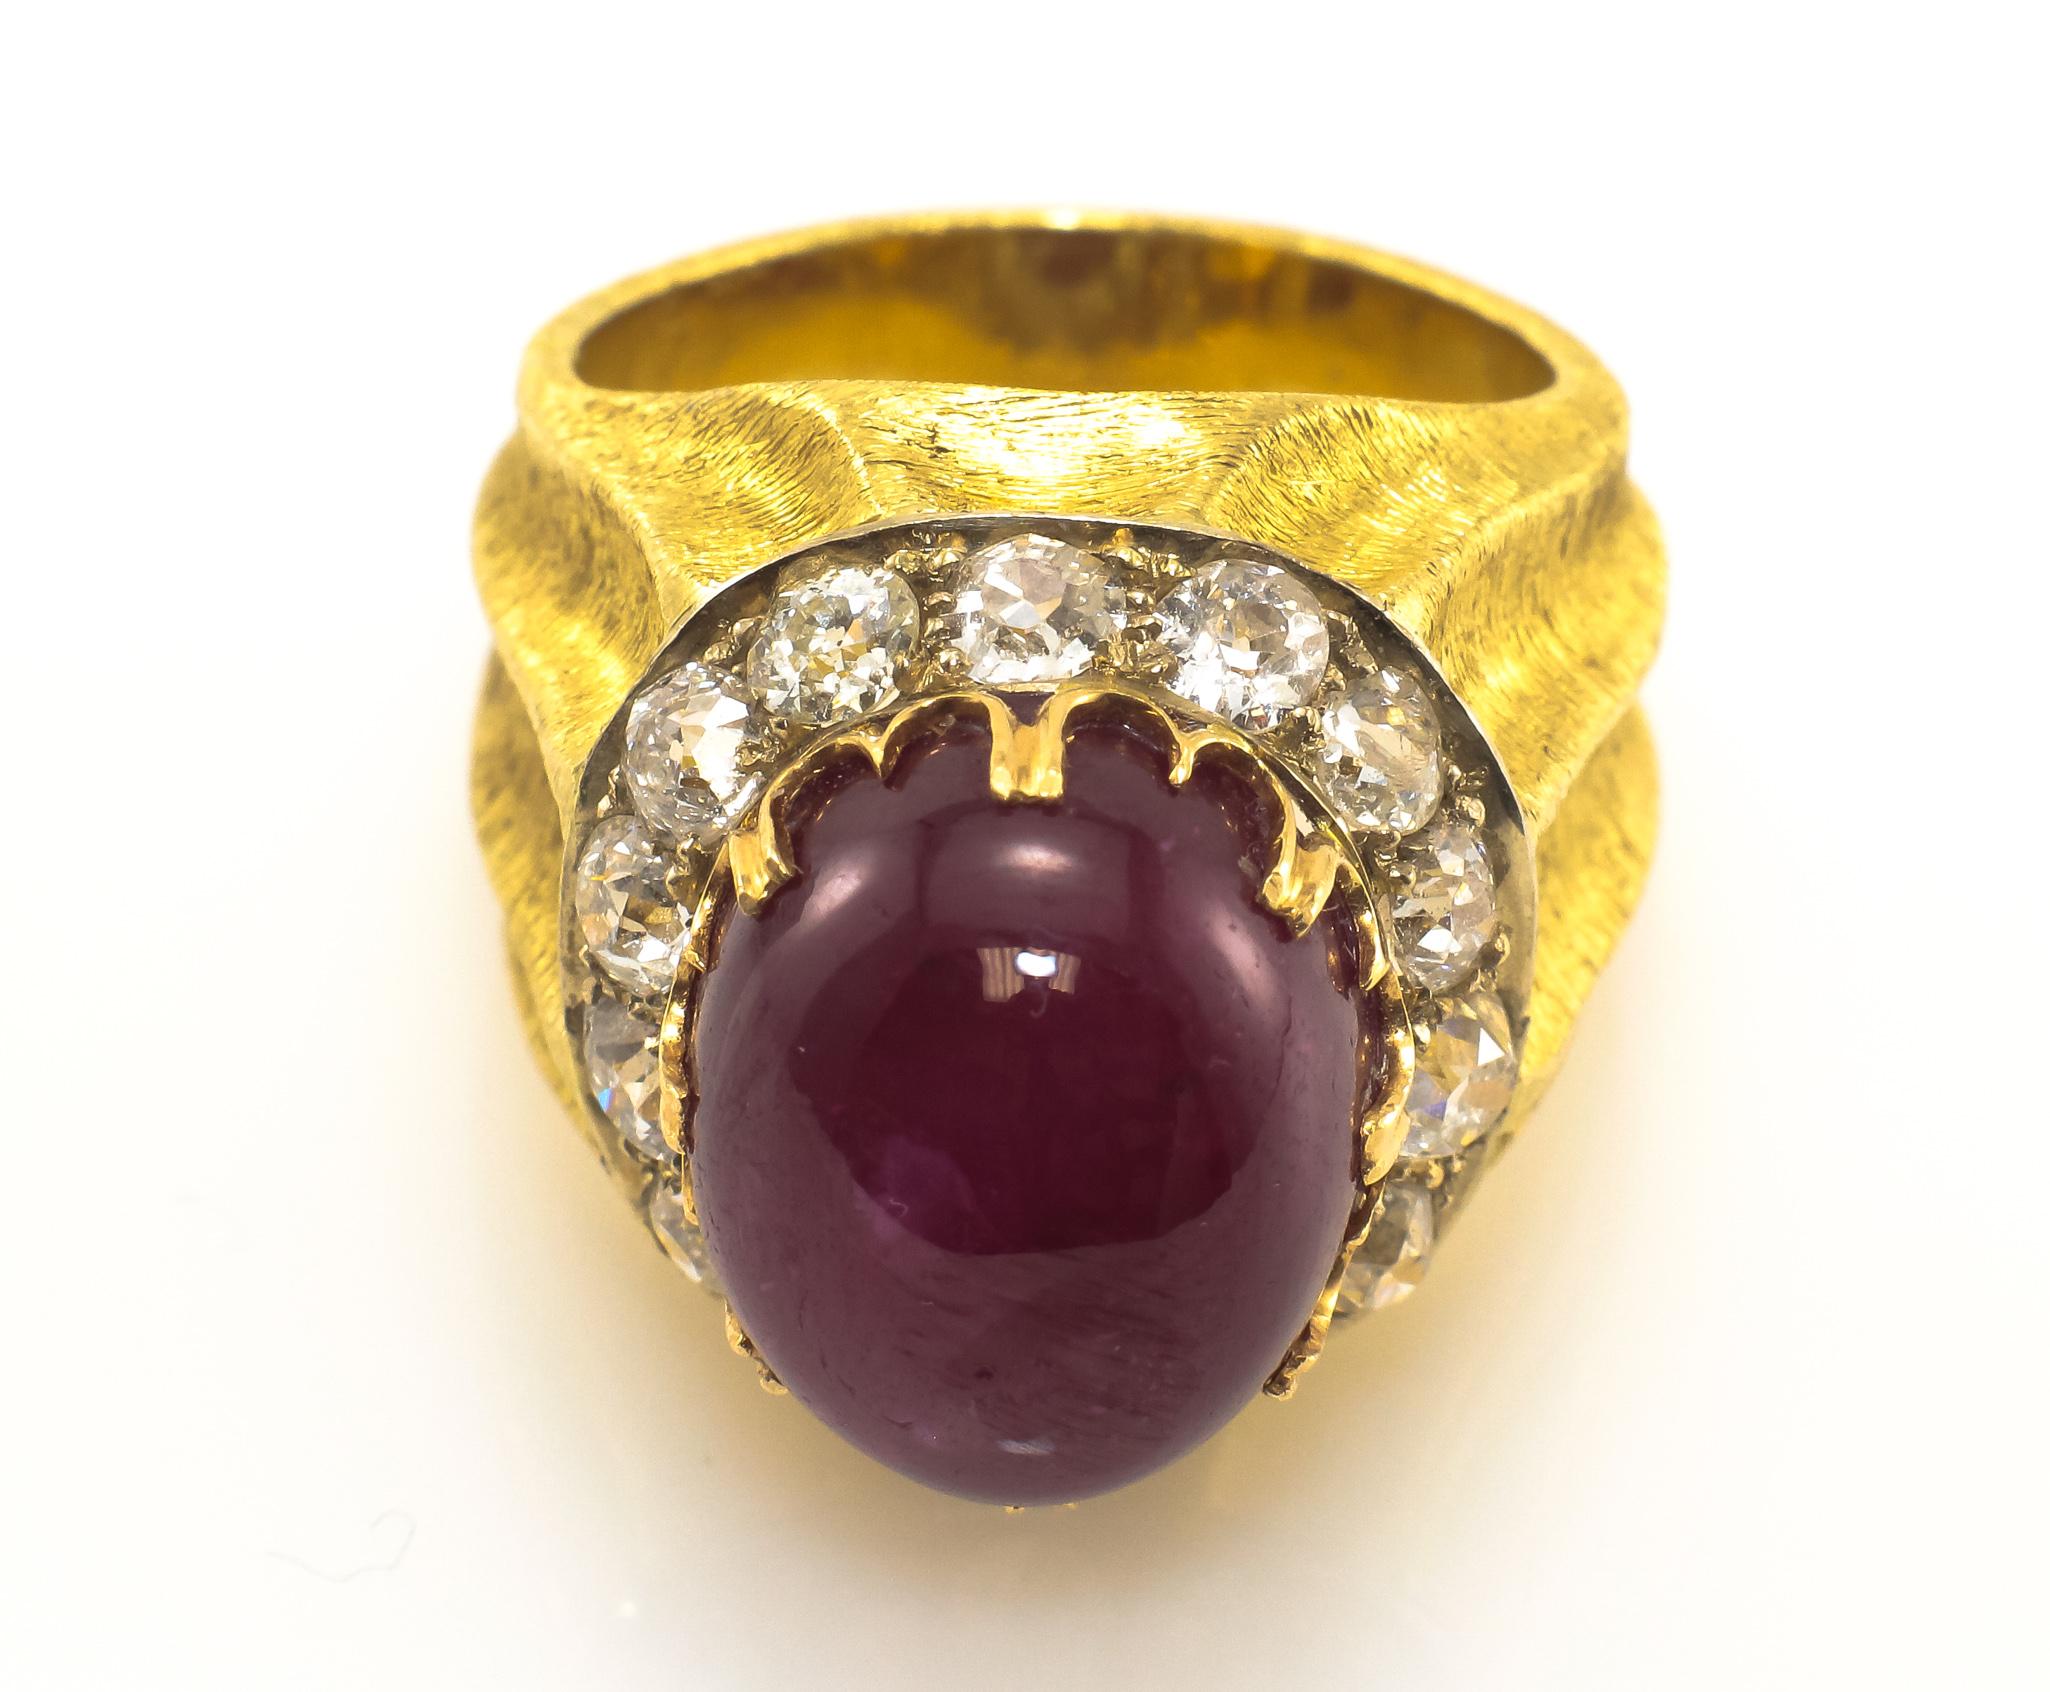 Vintage Mario Buccellati Ruby and Diamond Ring in 18K Yellow Gold.  The Cabochon Ruby weighs approximately 25.0 Carat and is surrounded by Old Mine Cut Diamonds 2.10 Carat Total weight, G-K in color and VS-SI in clarity.  Ring measures 1 1/4 inch in